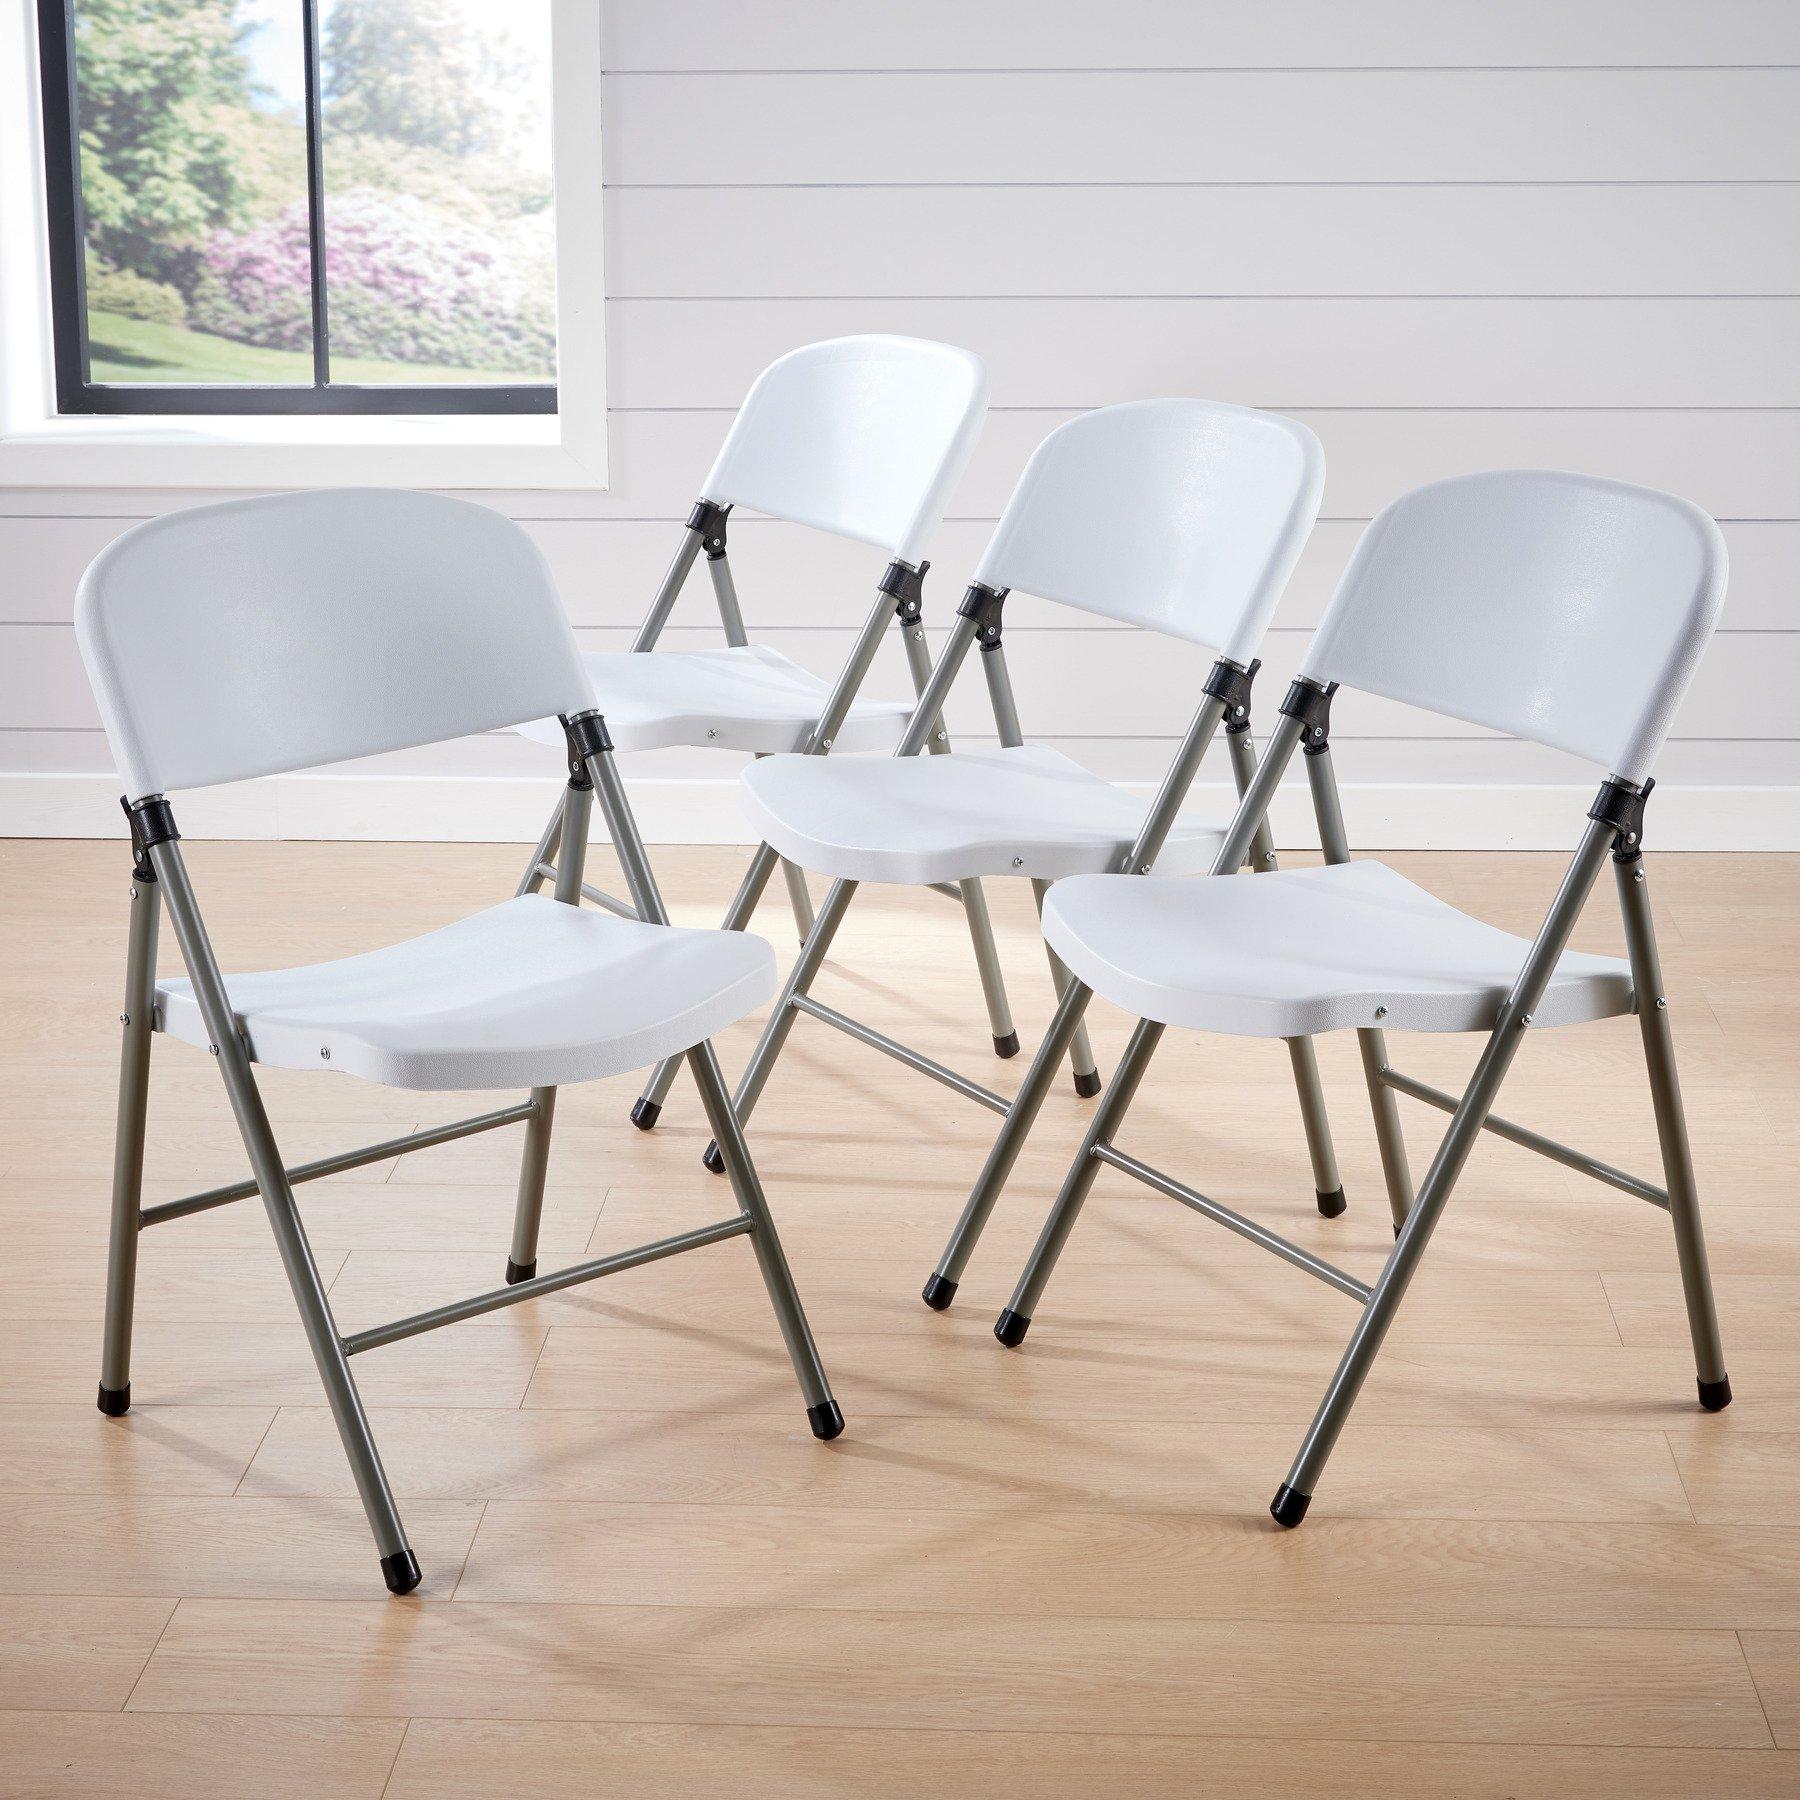 Pack of Four Folding Office Dining Chair Set